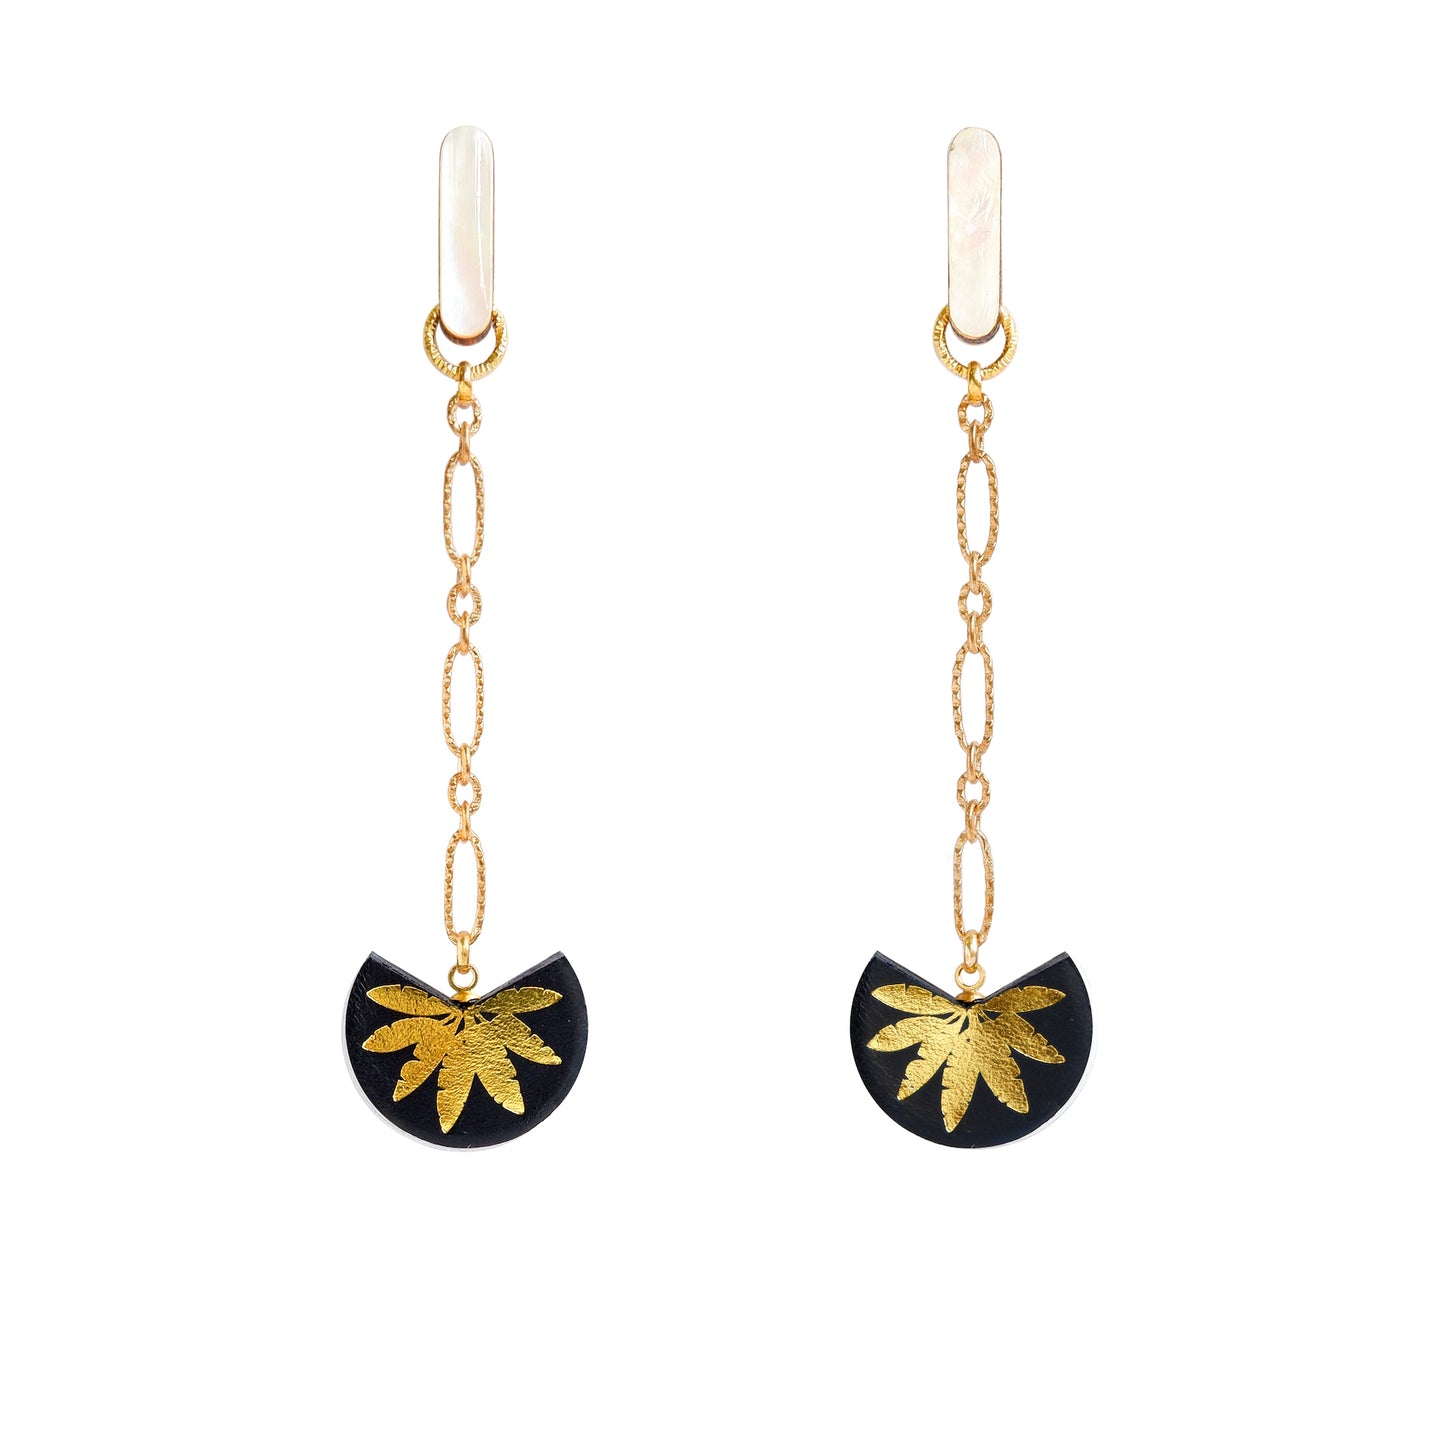 palm tree drop earrings. black leather medallions with gold palm print, on longl-link chain from long mother of pearl studs